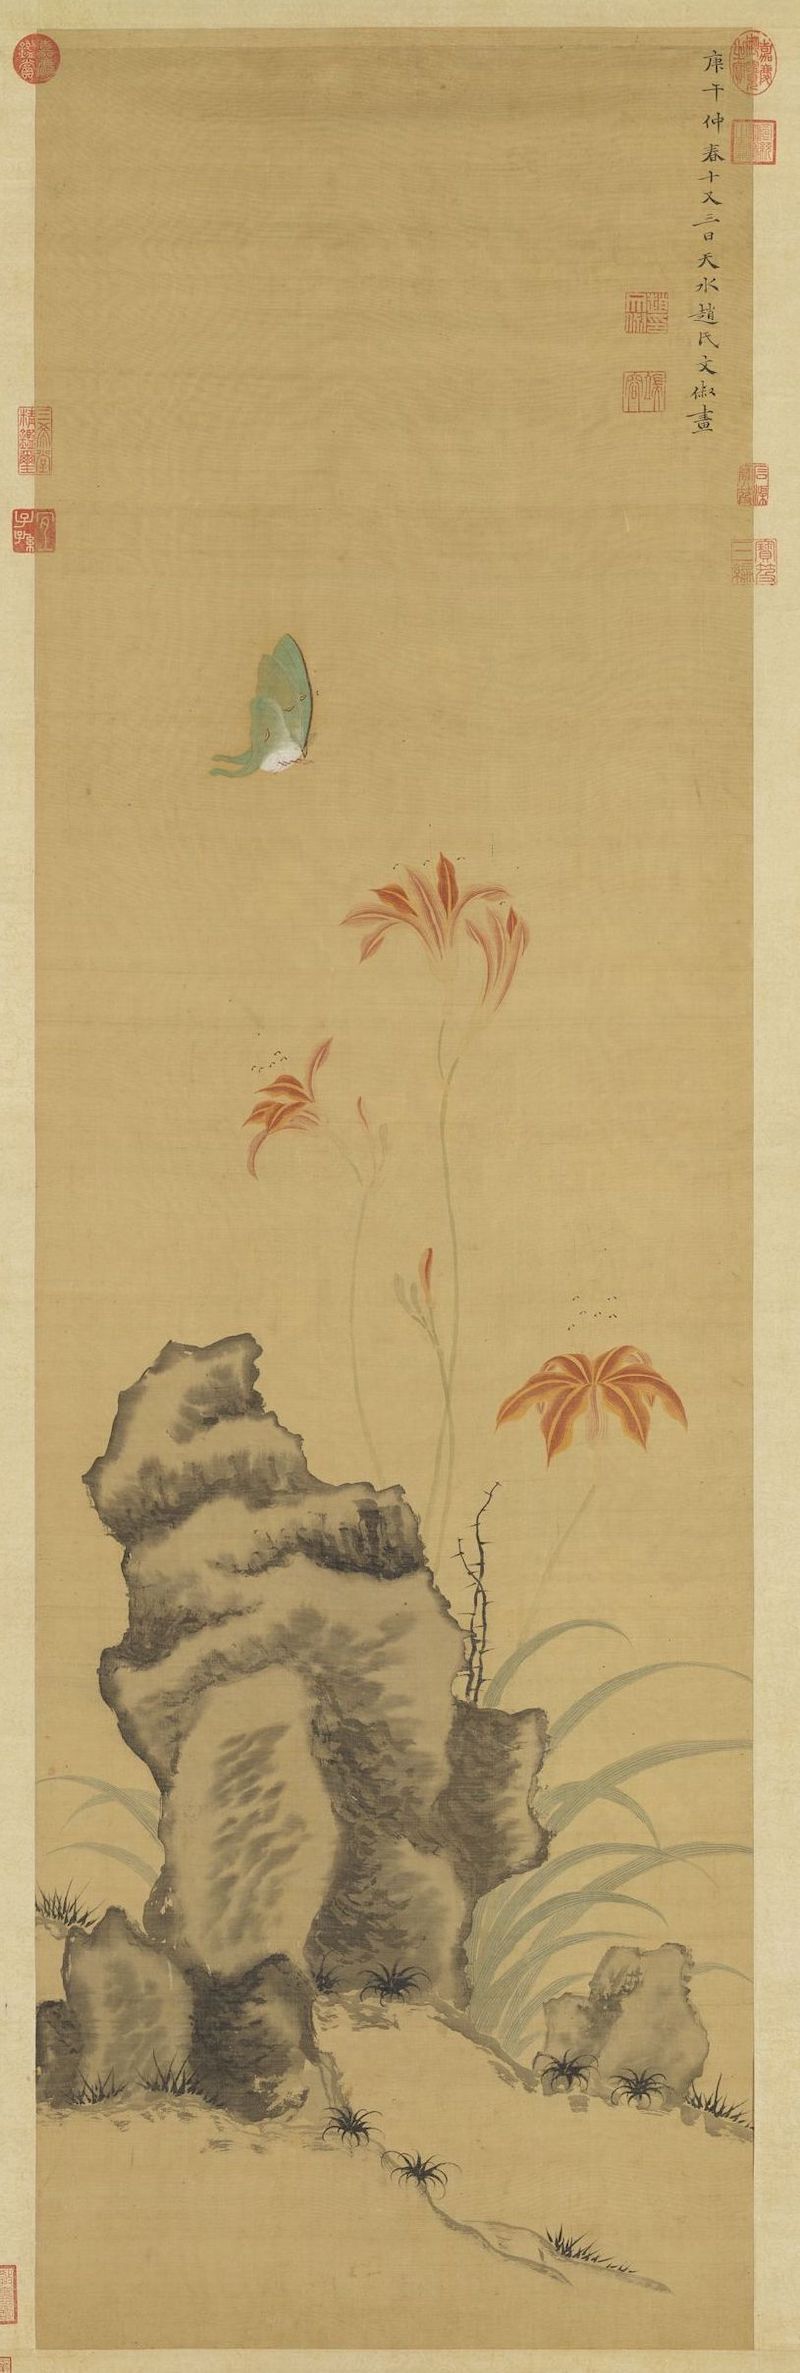 Zhao Wenchu, Ming Dynasty, Painting Flowers and Butterflies, Scroll, Collection of the National Palace Museum, Taipei